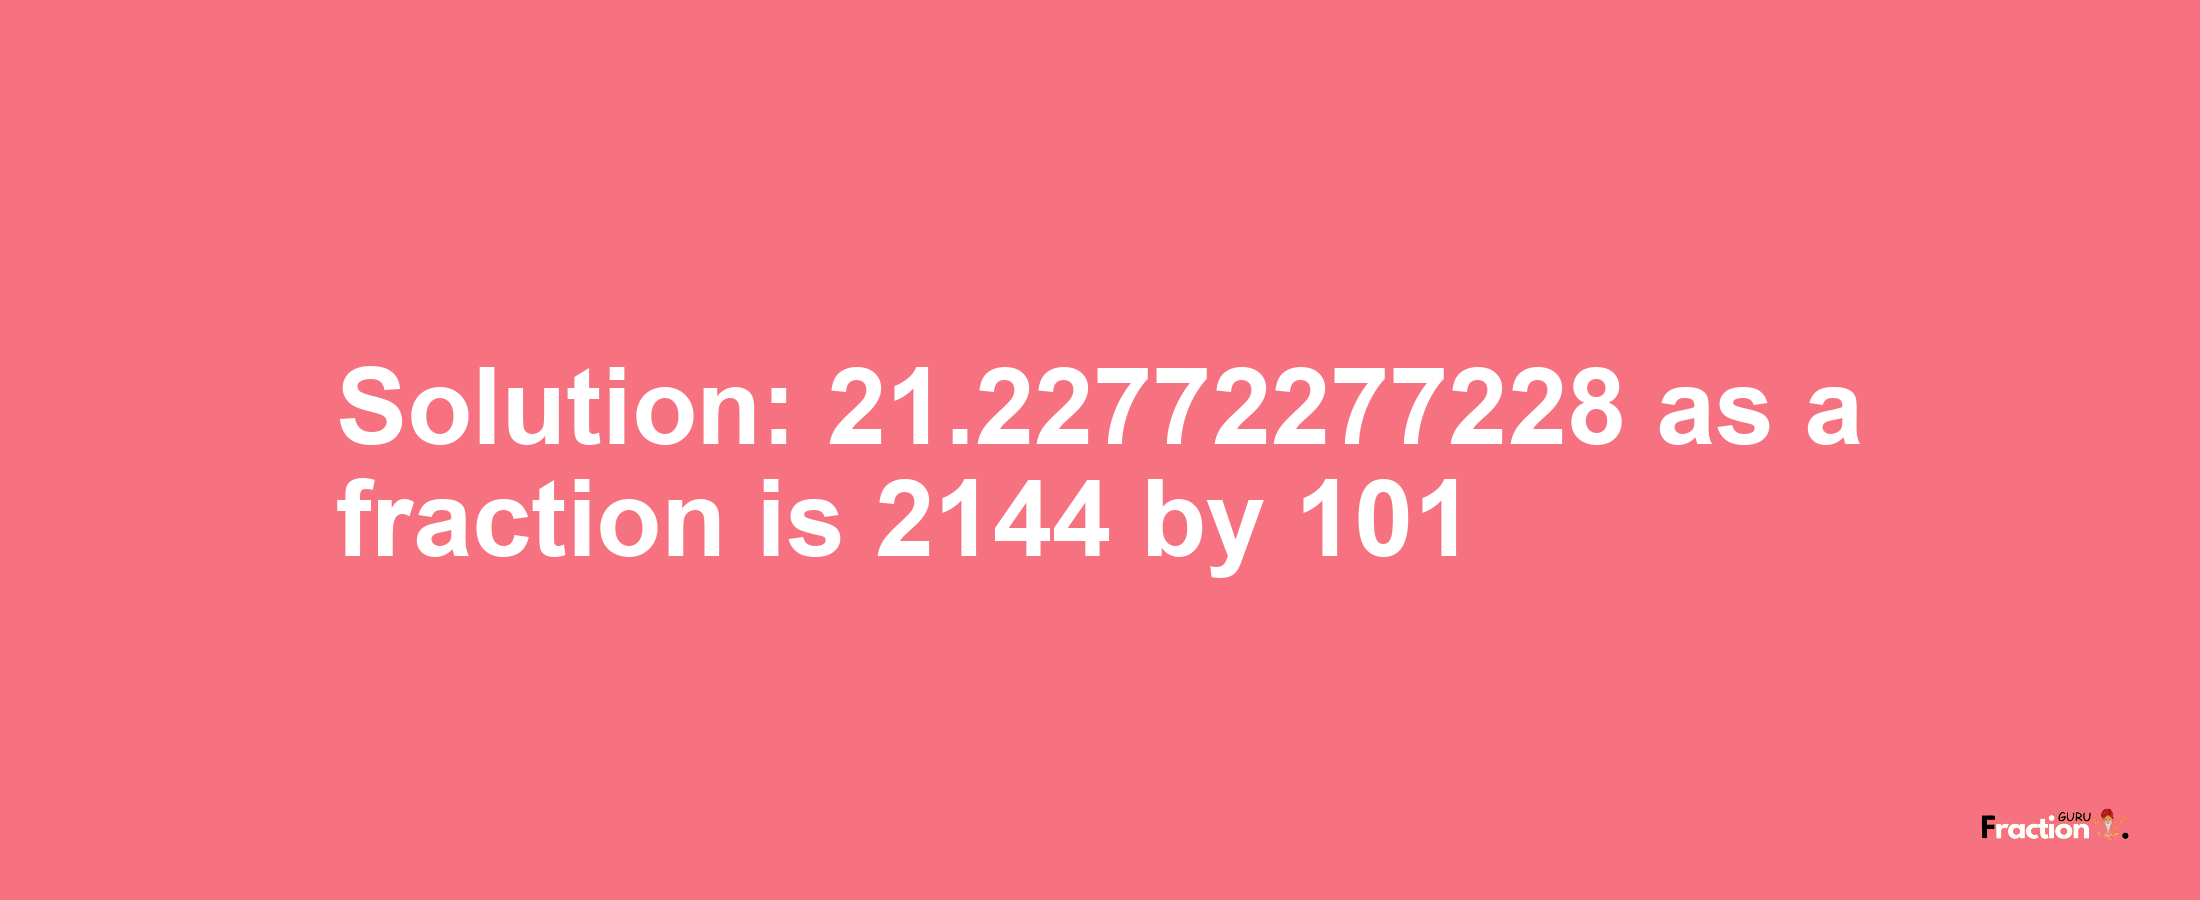 Solution:21.22772277228 as a fraction is 2144/101